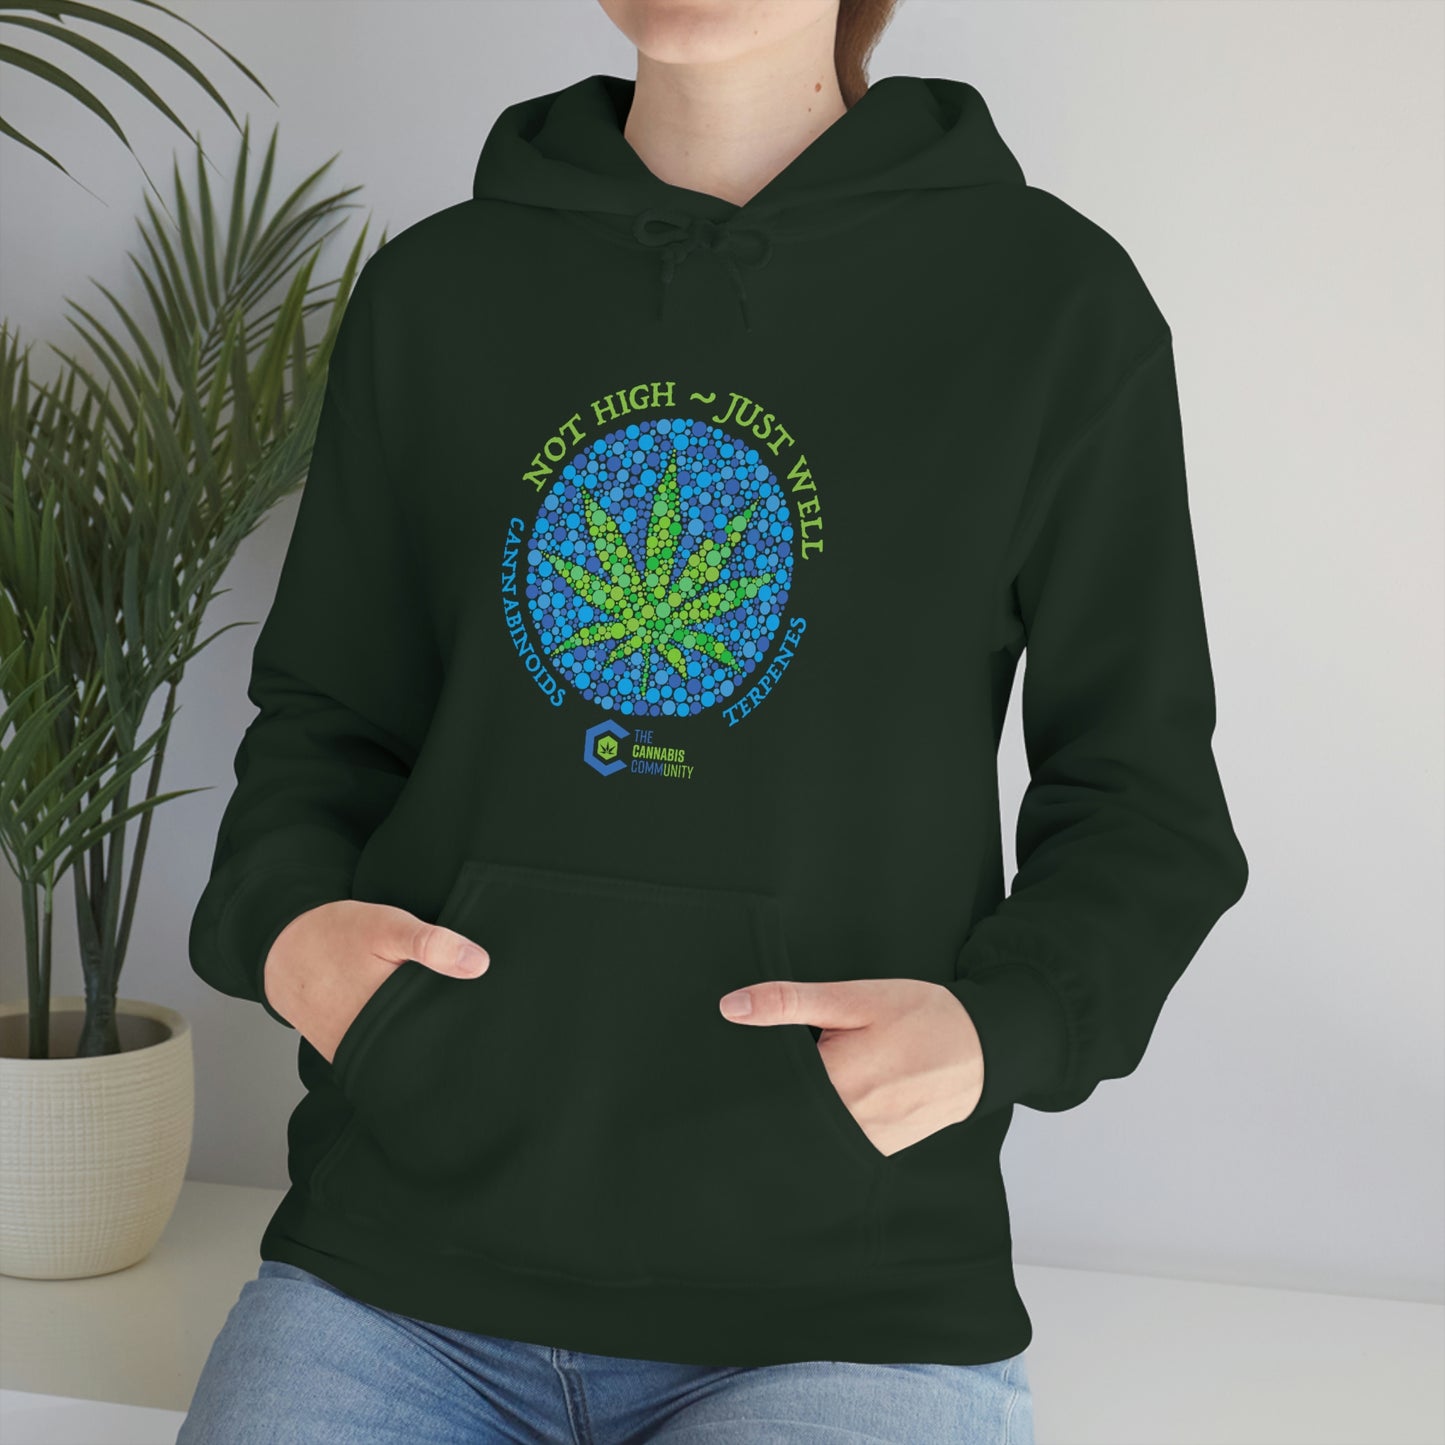 A woman wearing a Not High, Just Well Cannabis Hoodie with a marijuana leaf on it.